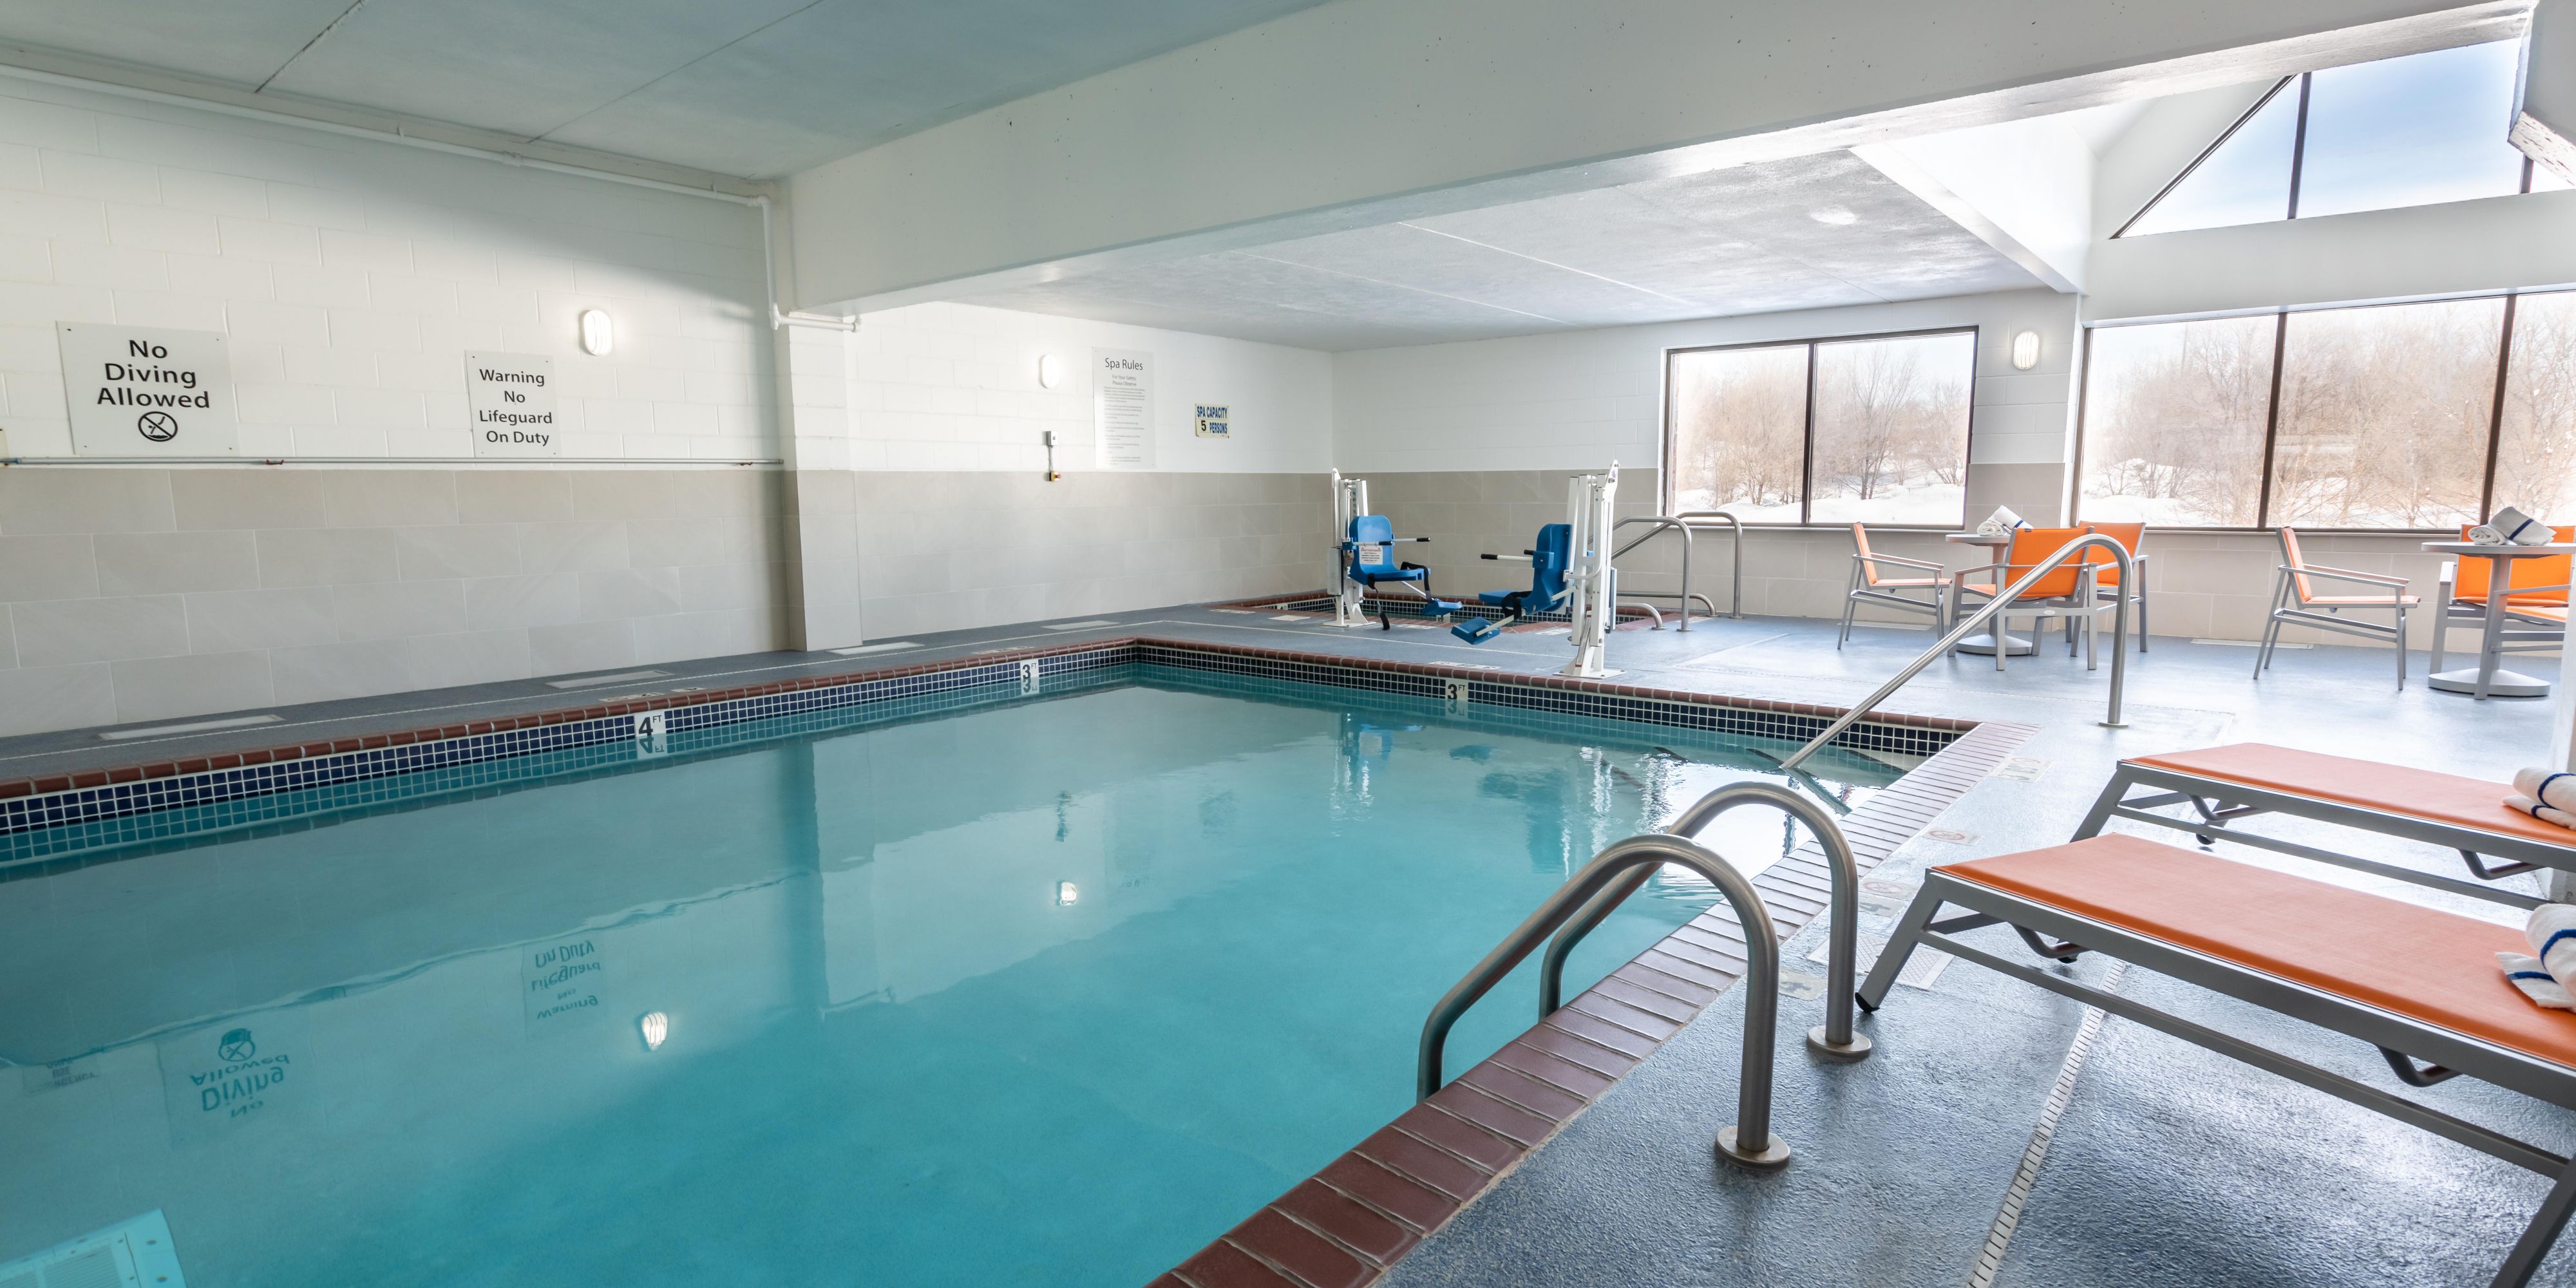 Enjoy time relaxing in our heated indoor swimming pool & spa.  Make the most of your trip and take a dip!